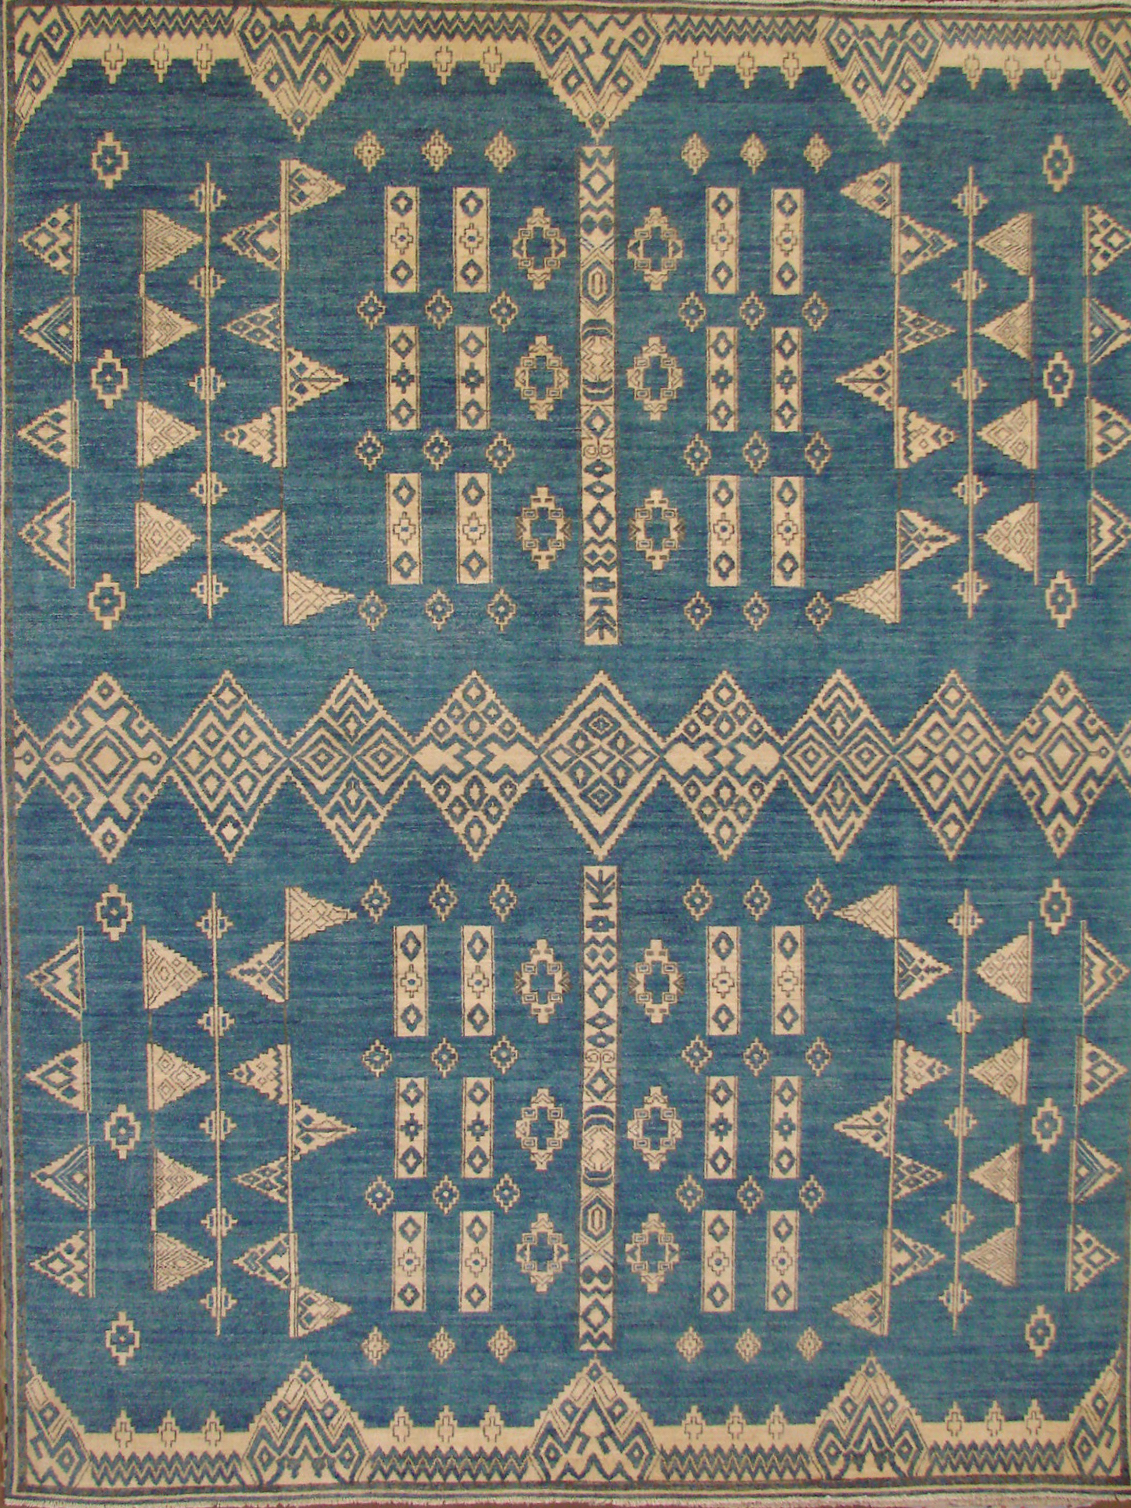 Antique Style Rugs TUARGE 021499 Medium Blue - Navy & Ivory - Beige Hand Knotted Rug